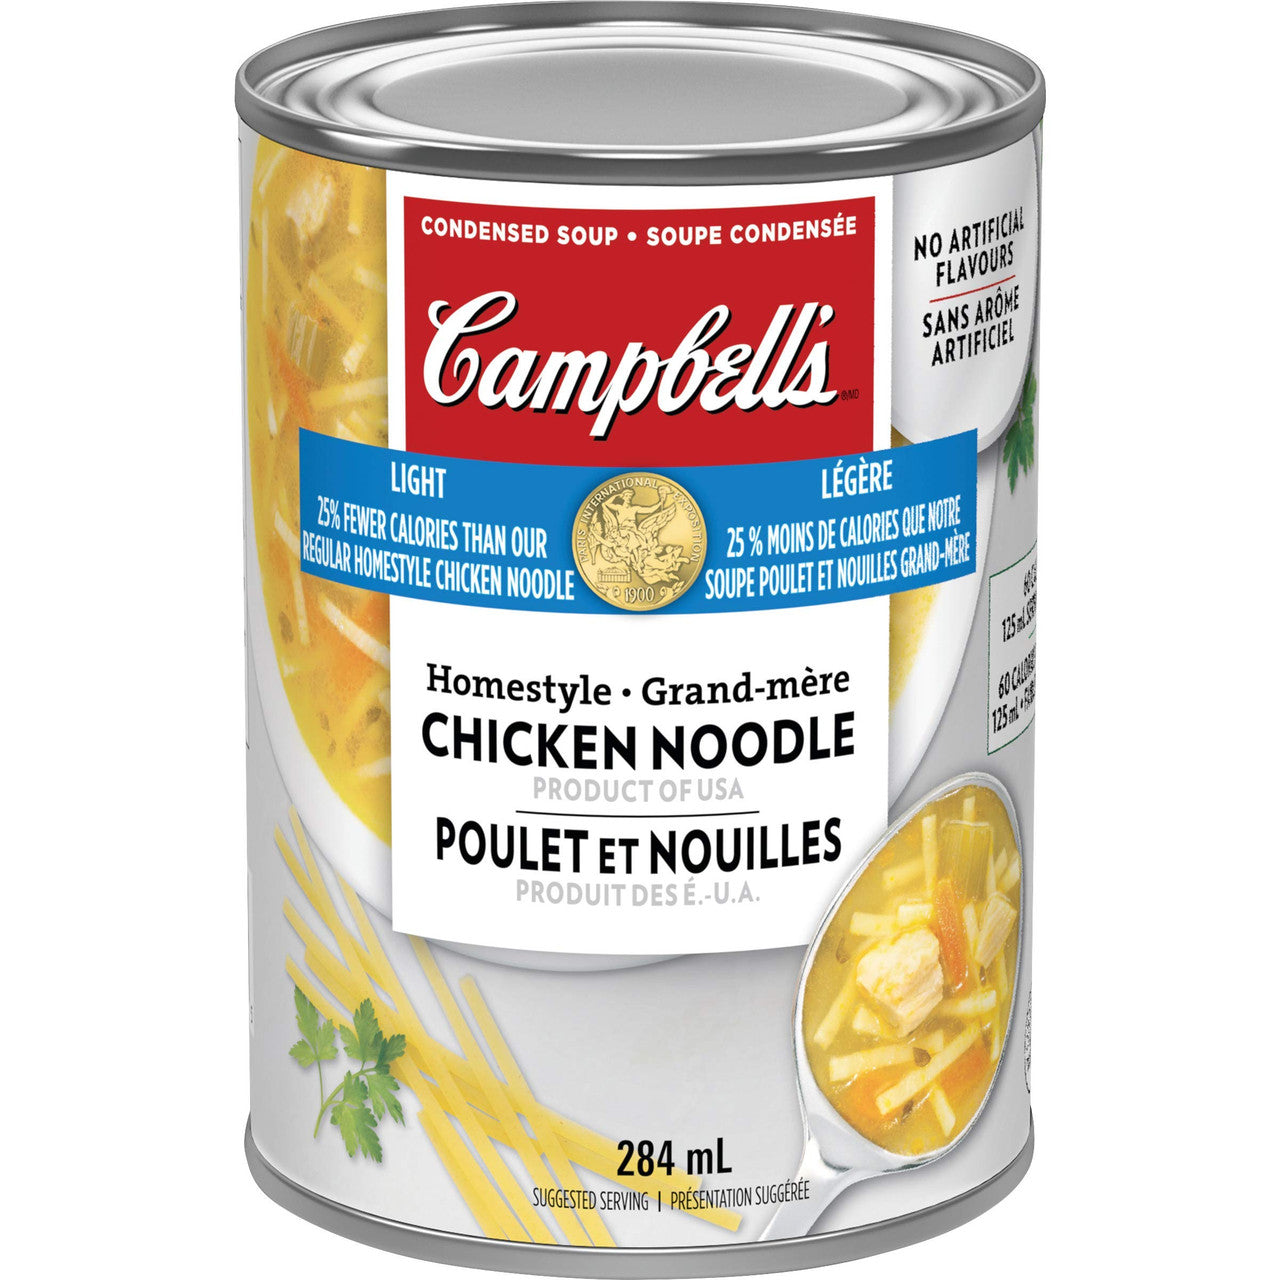 Campbell's Light Homestyle Chicken Noodle Soup, 284ml/9.6 oz. (Canadian)